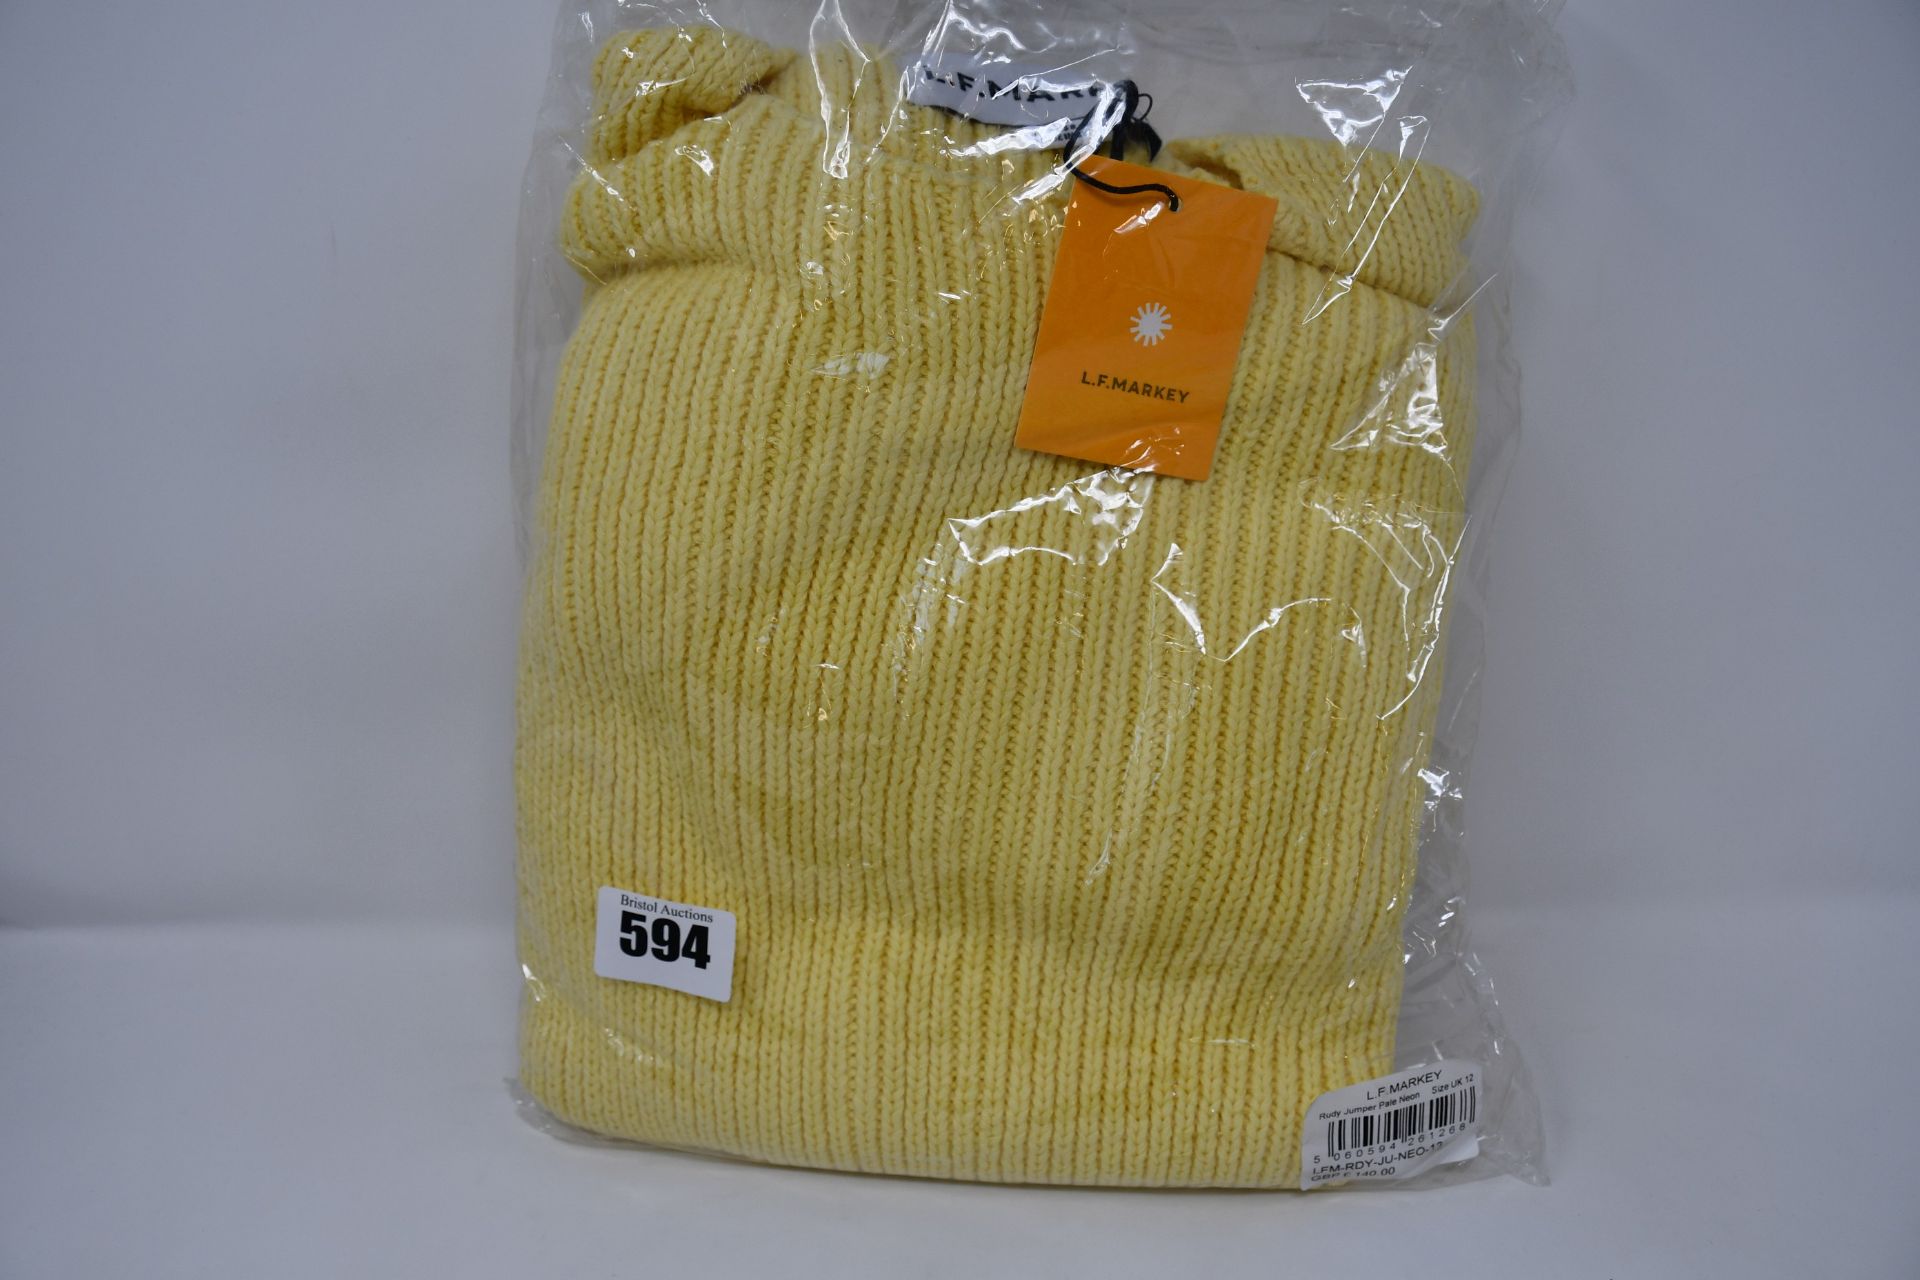 Two as new L.F.Markey Rudy jumpers in lemon (UK 8 and 12).